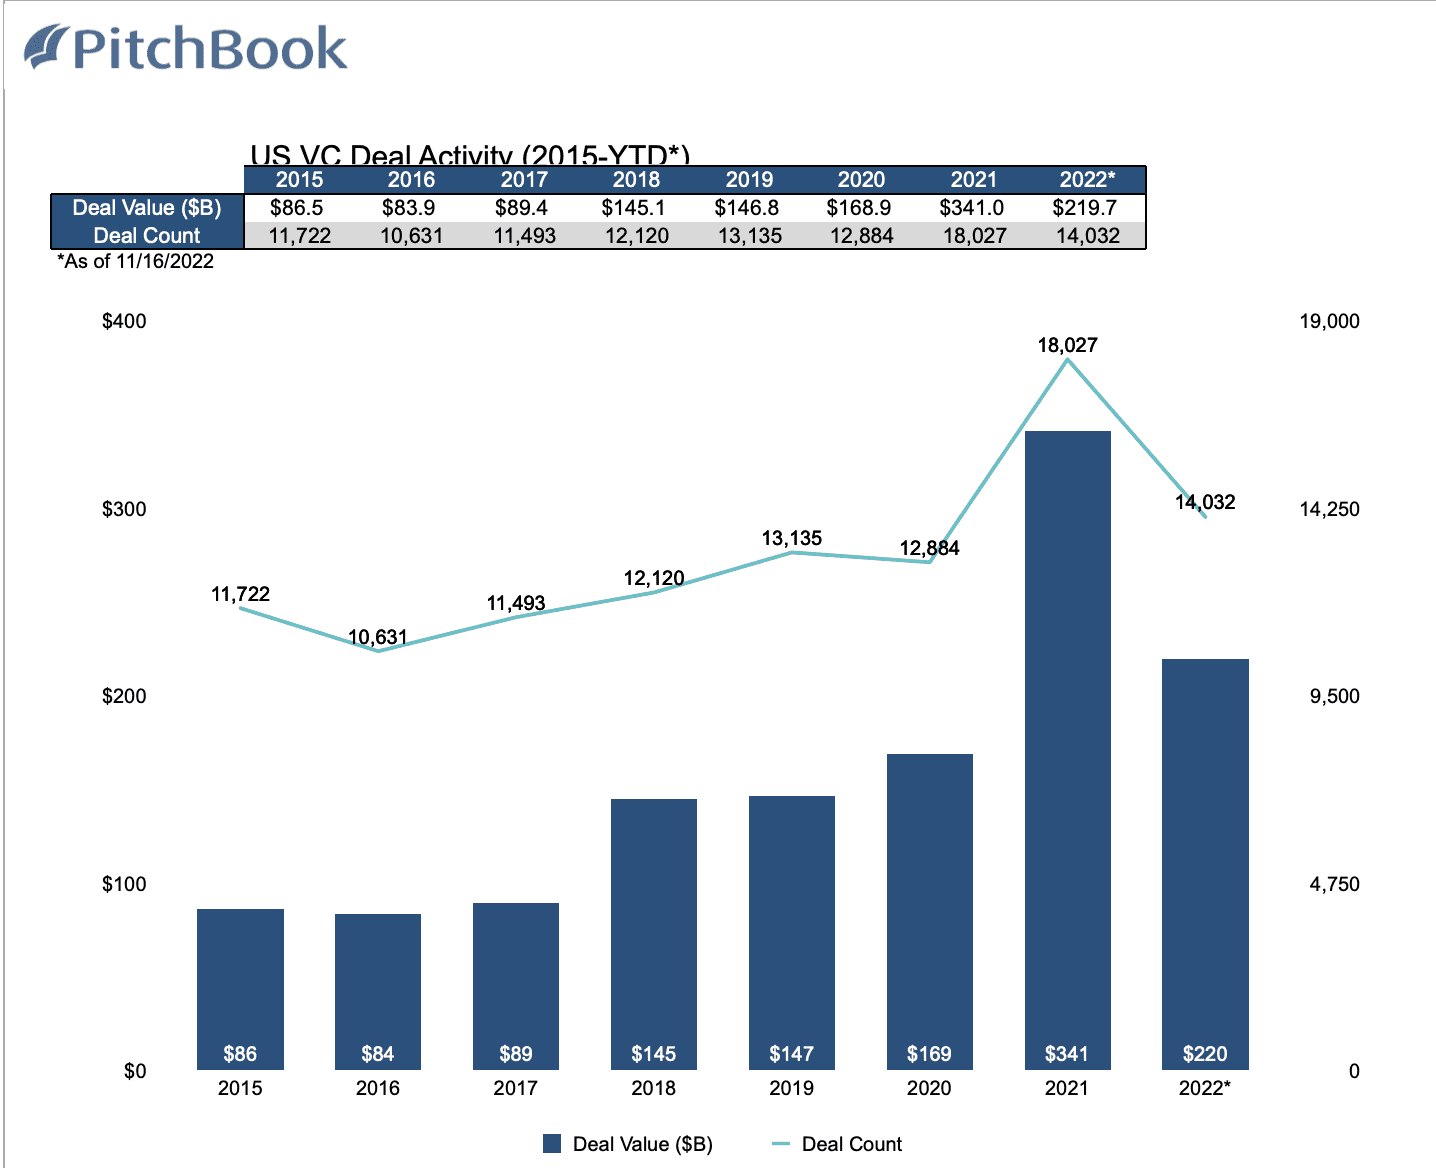 Total venture capital deal activity, according to Pitchbook data, for the last five years.